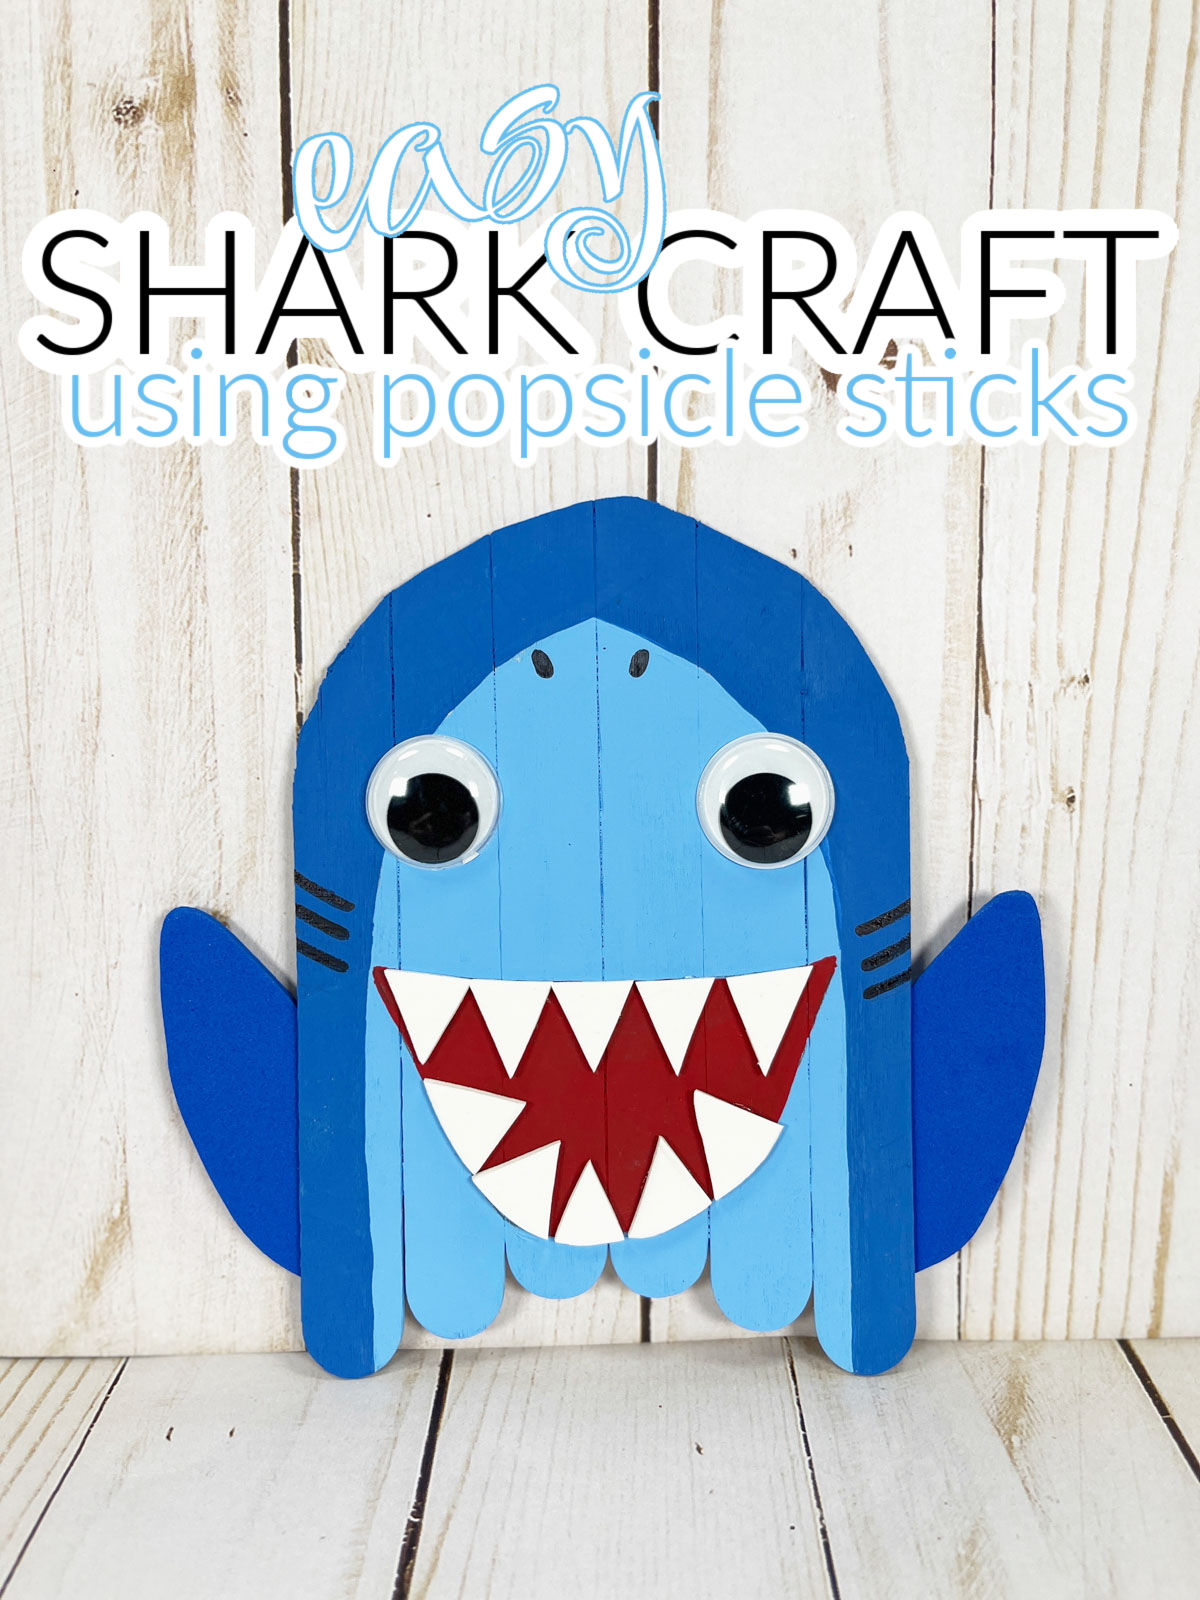 Easy Shark Craft made using popsicle sticks on a white wooden background.